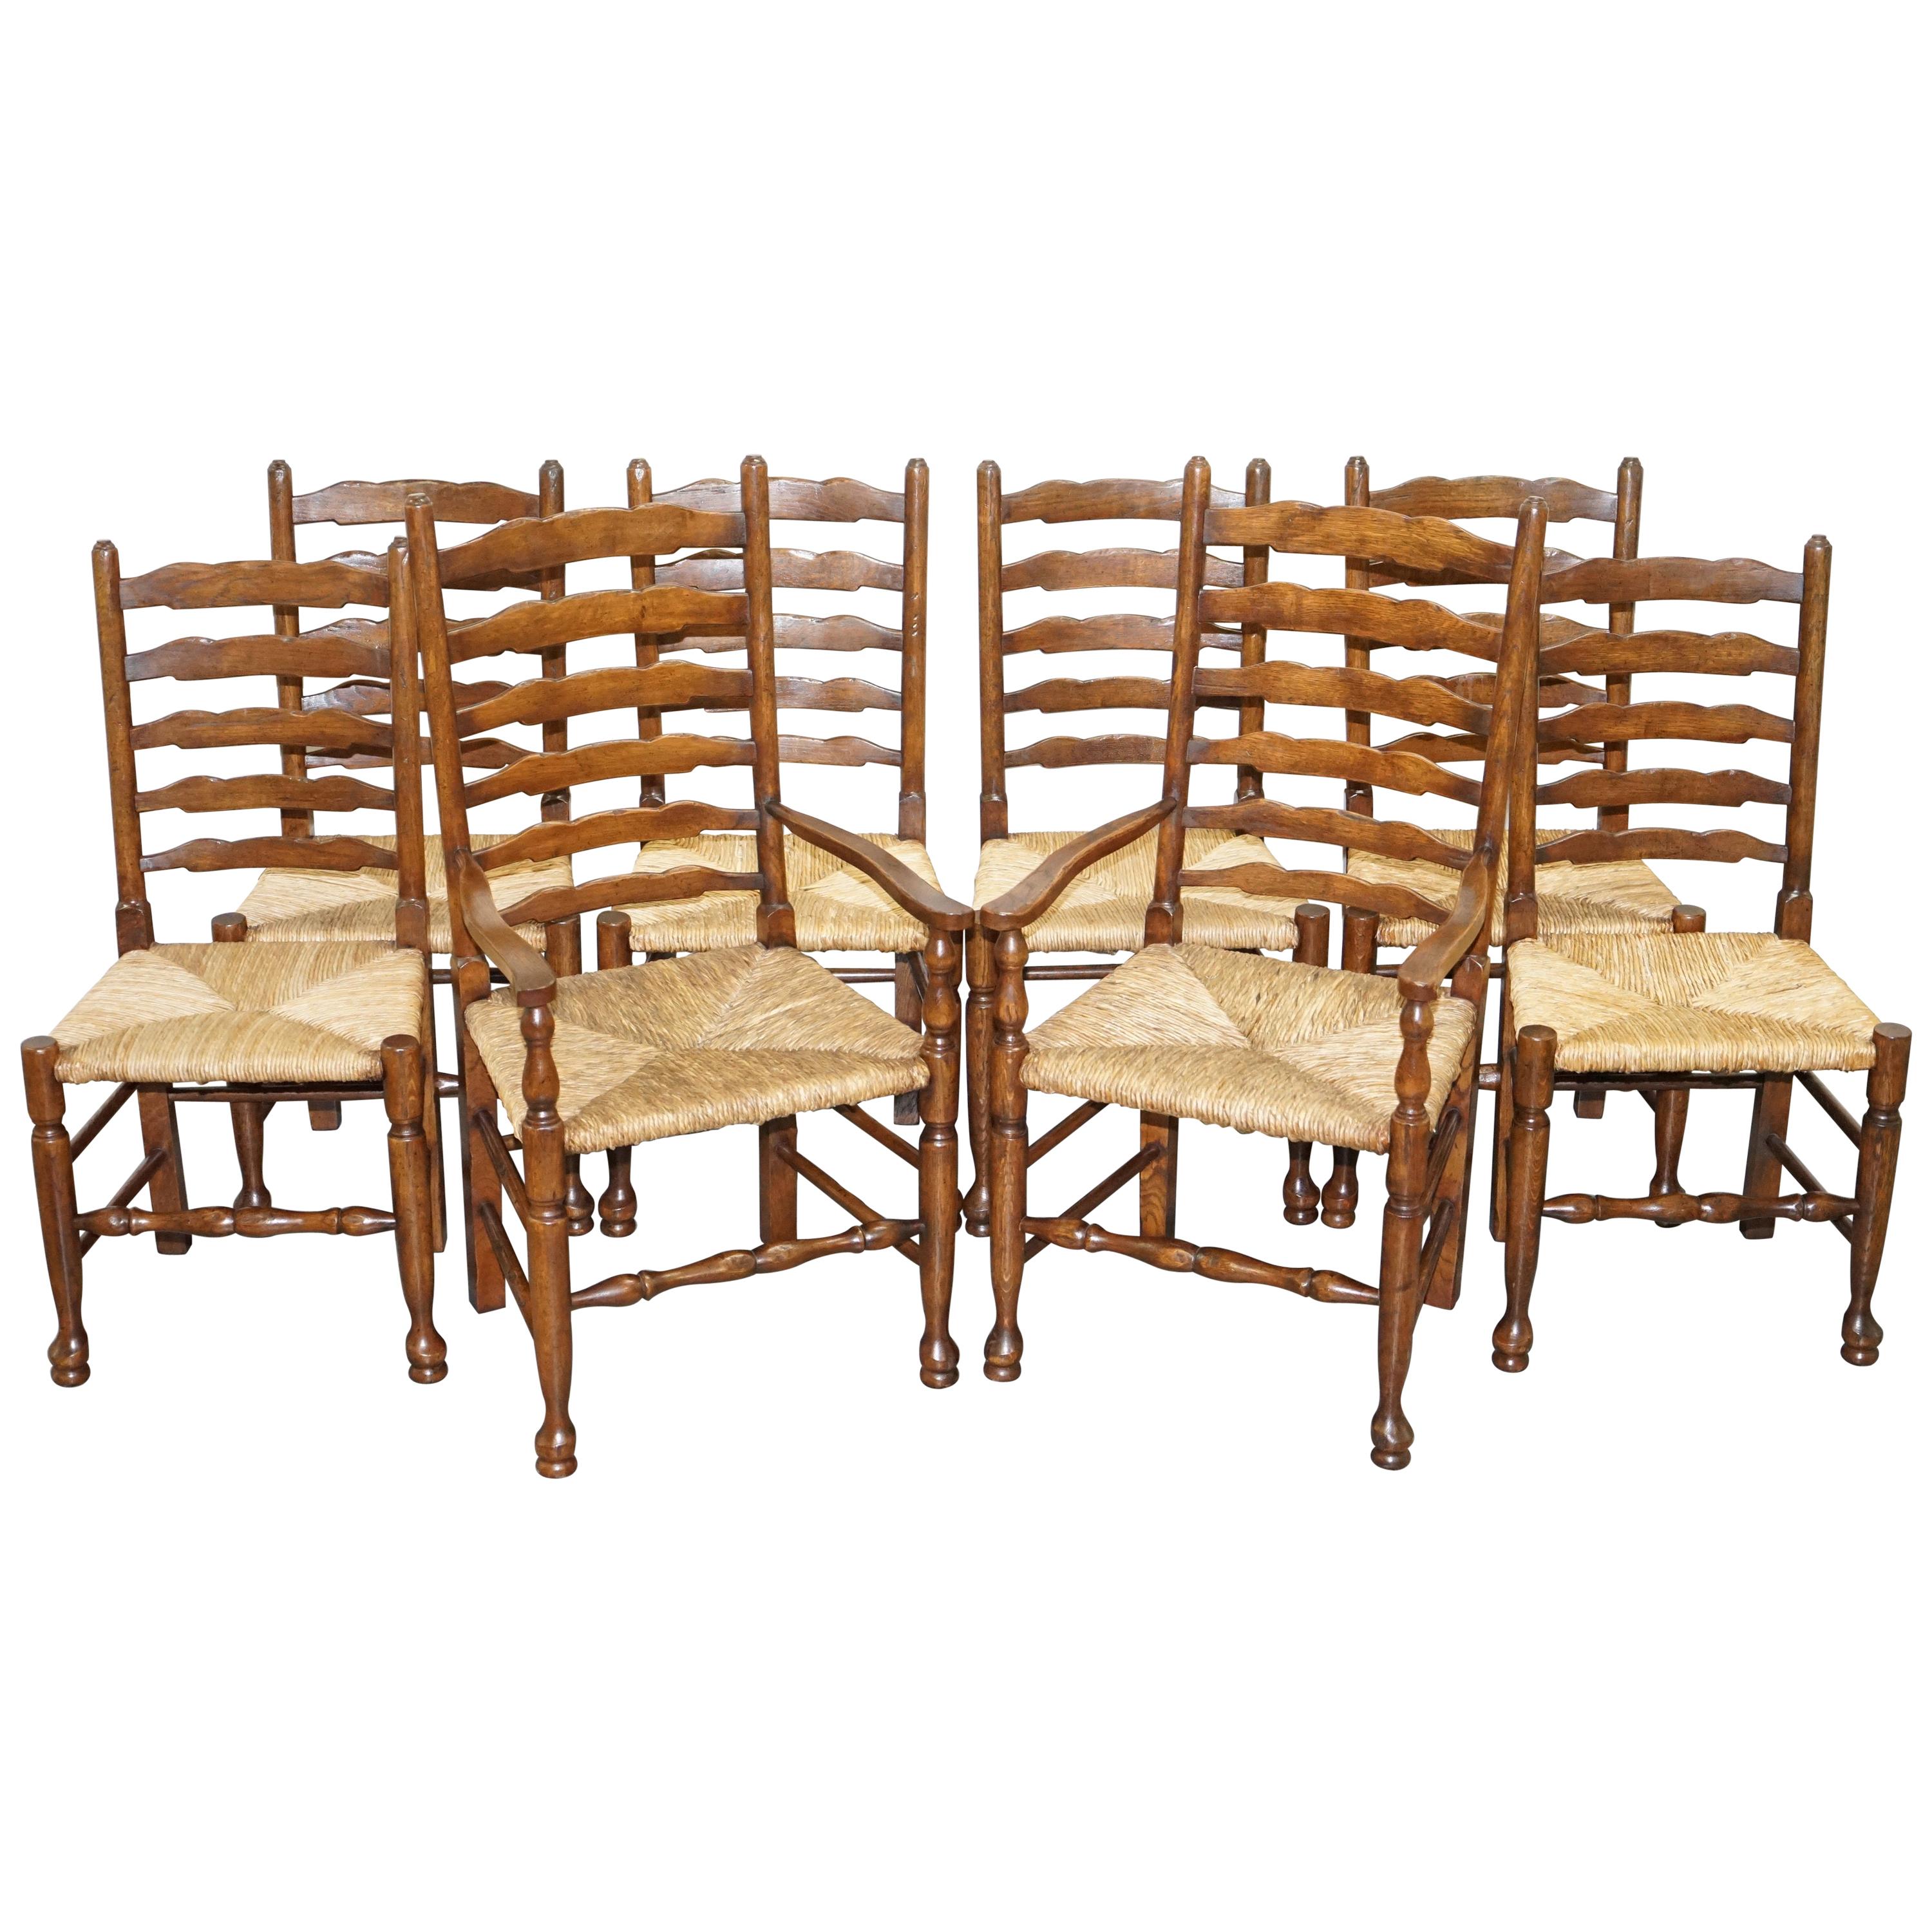 Lovely Suite of Eight circa 1880 Dutch Ladder Back Oak Rush Seat Dining Chairs 8